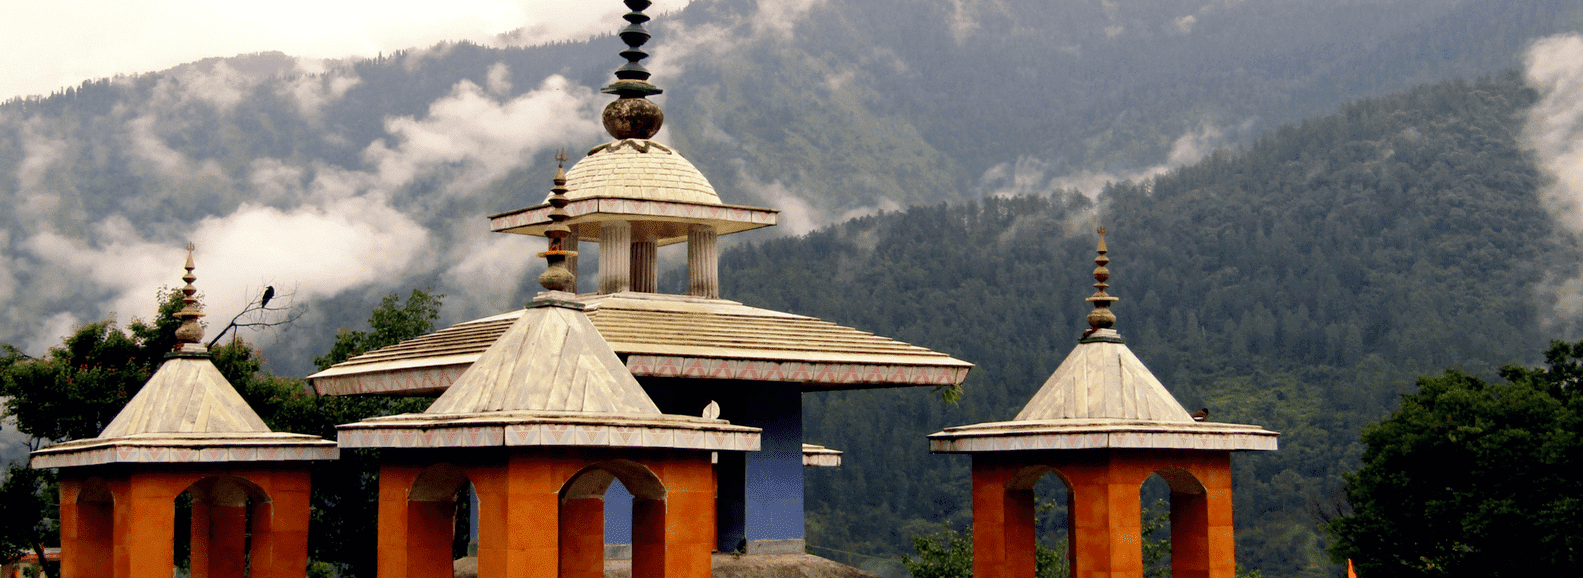 Uttarkashi temple image in Ganga valley Uttarakhand with clouds and mountaind behind